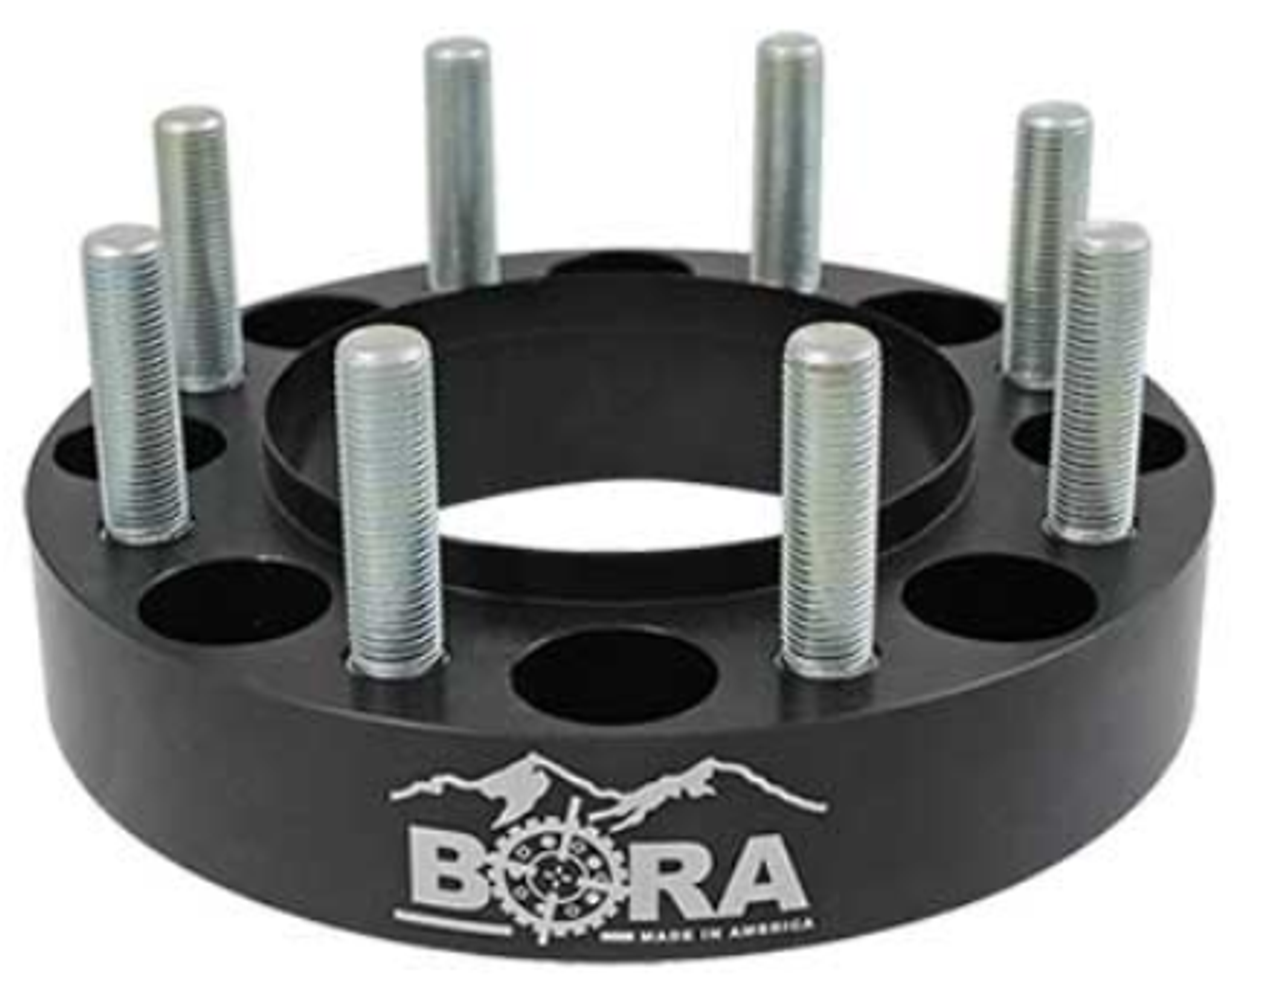 New Holland 1720/Boomer/Workmaster Series Wheel Spacers